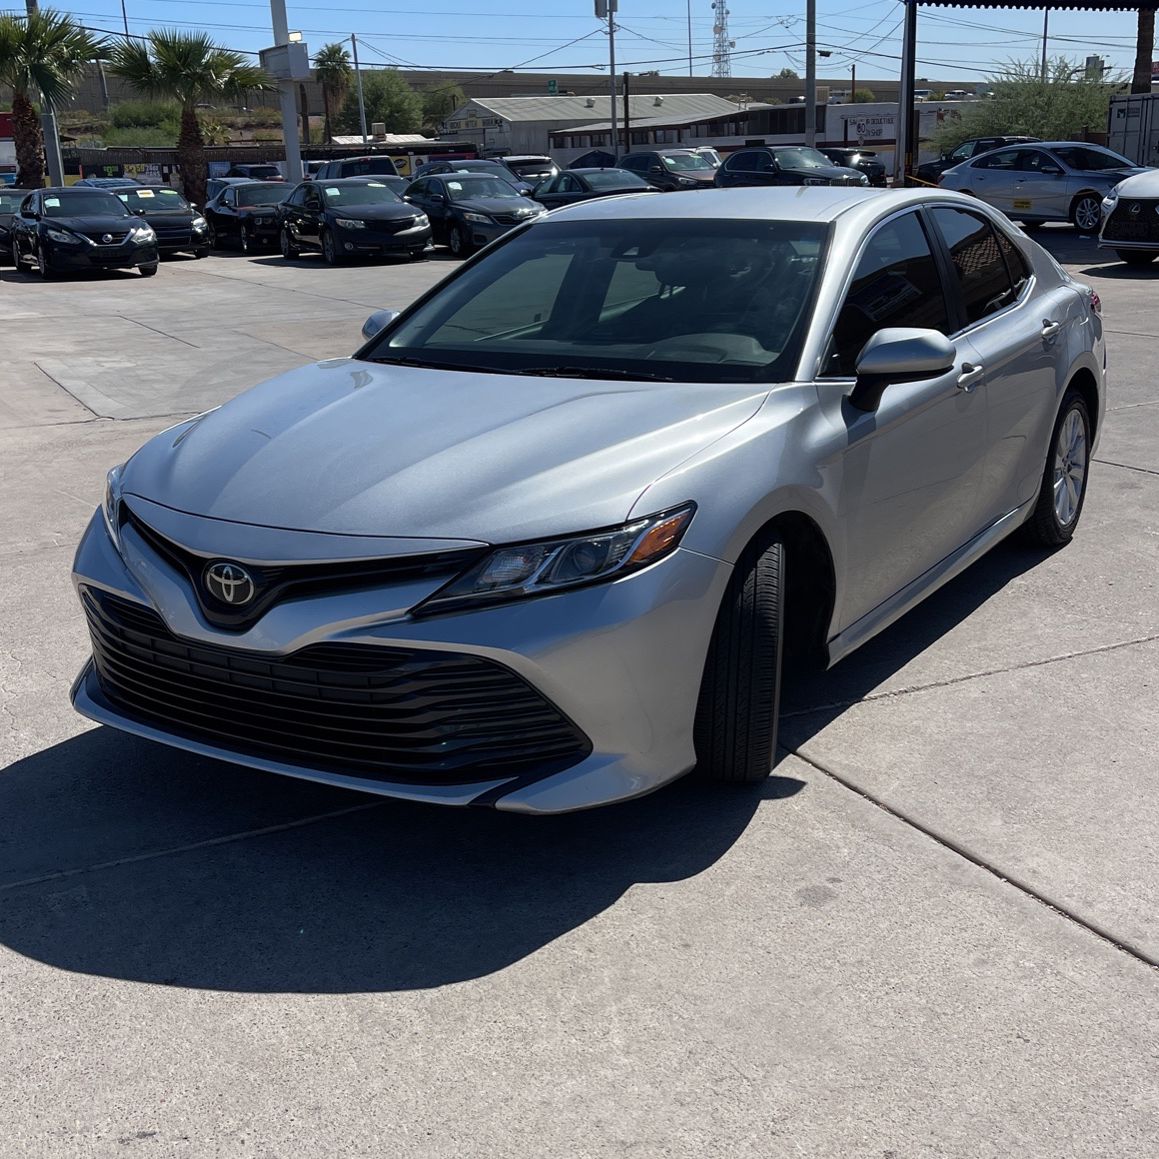 2018 Toyota Camry As Low As $999 Down OAC